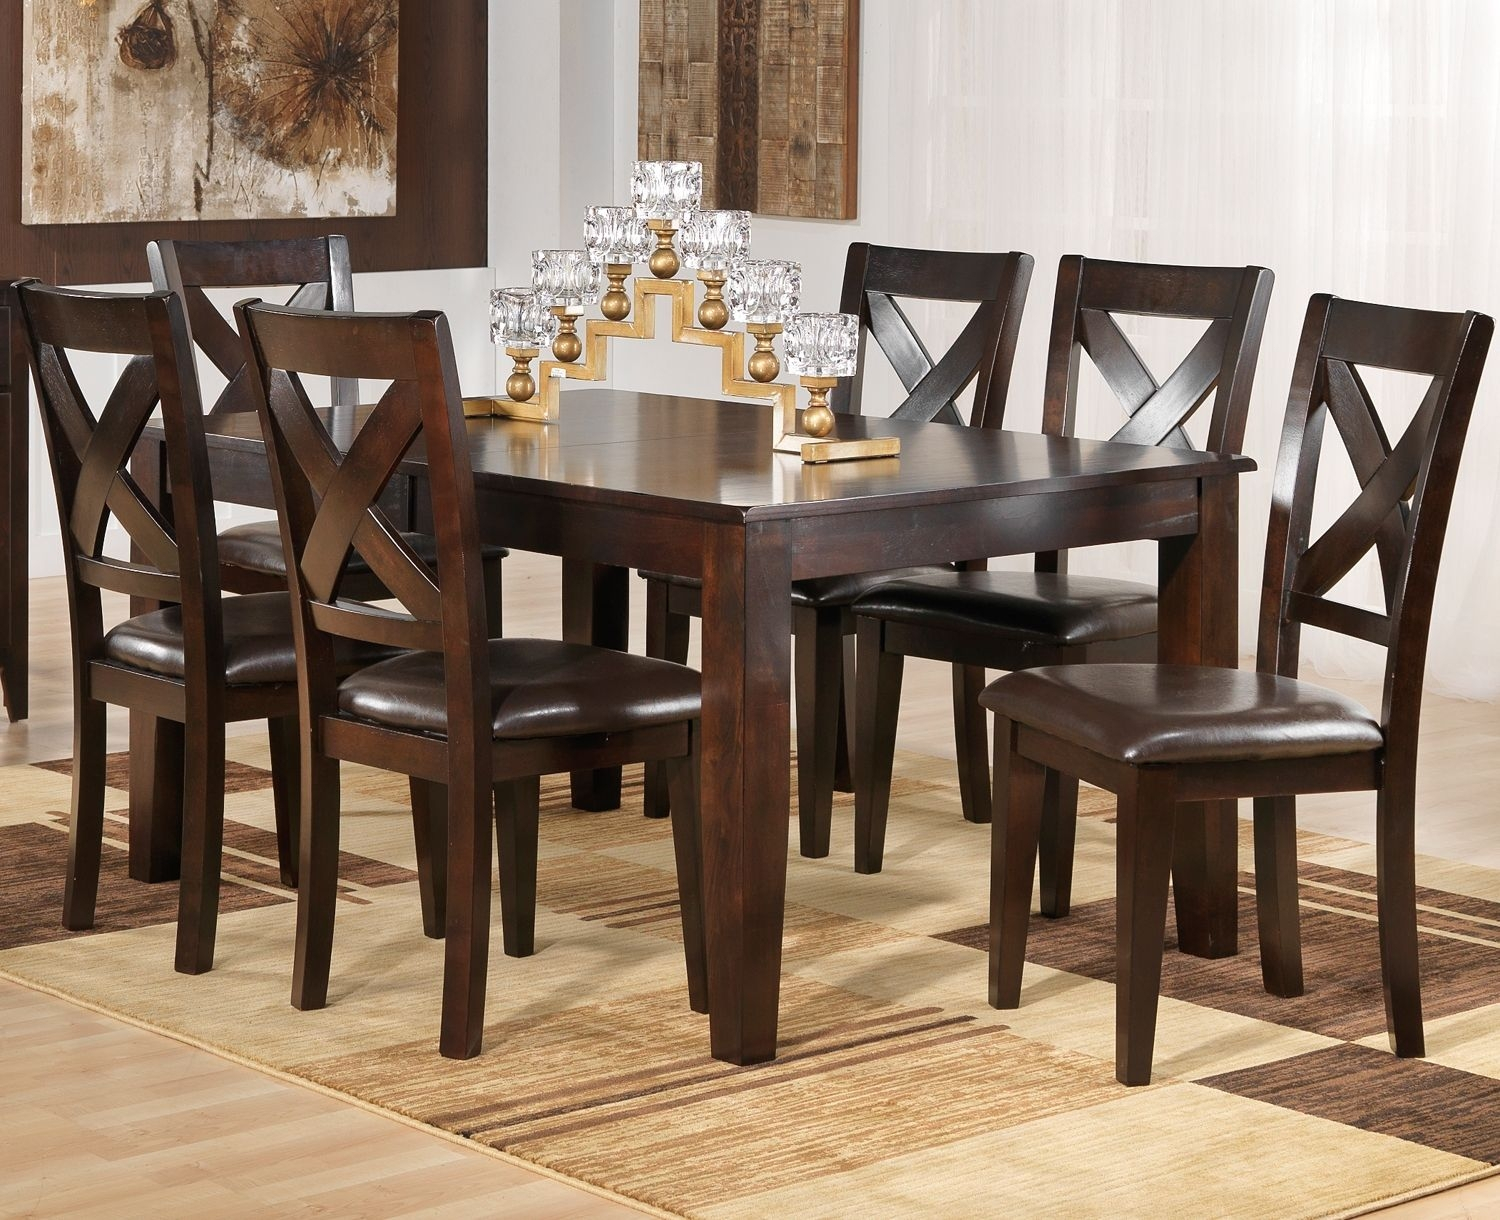 Dining Room Sets Leons Layjao intended for dimensions 1500 X 1220